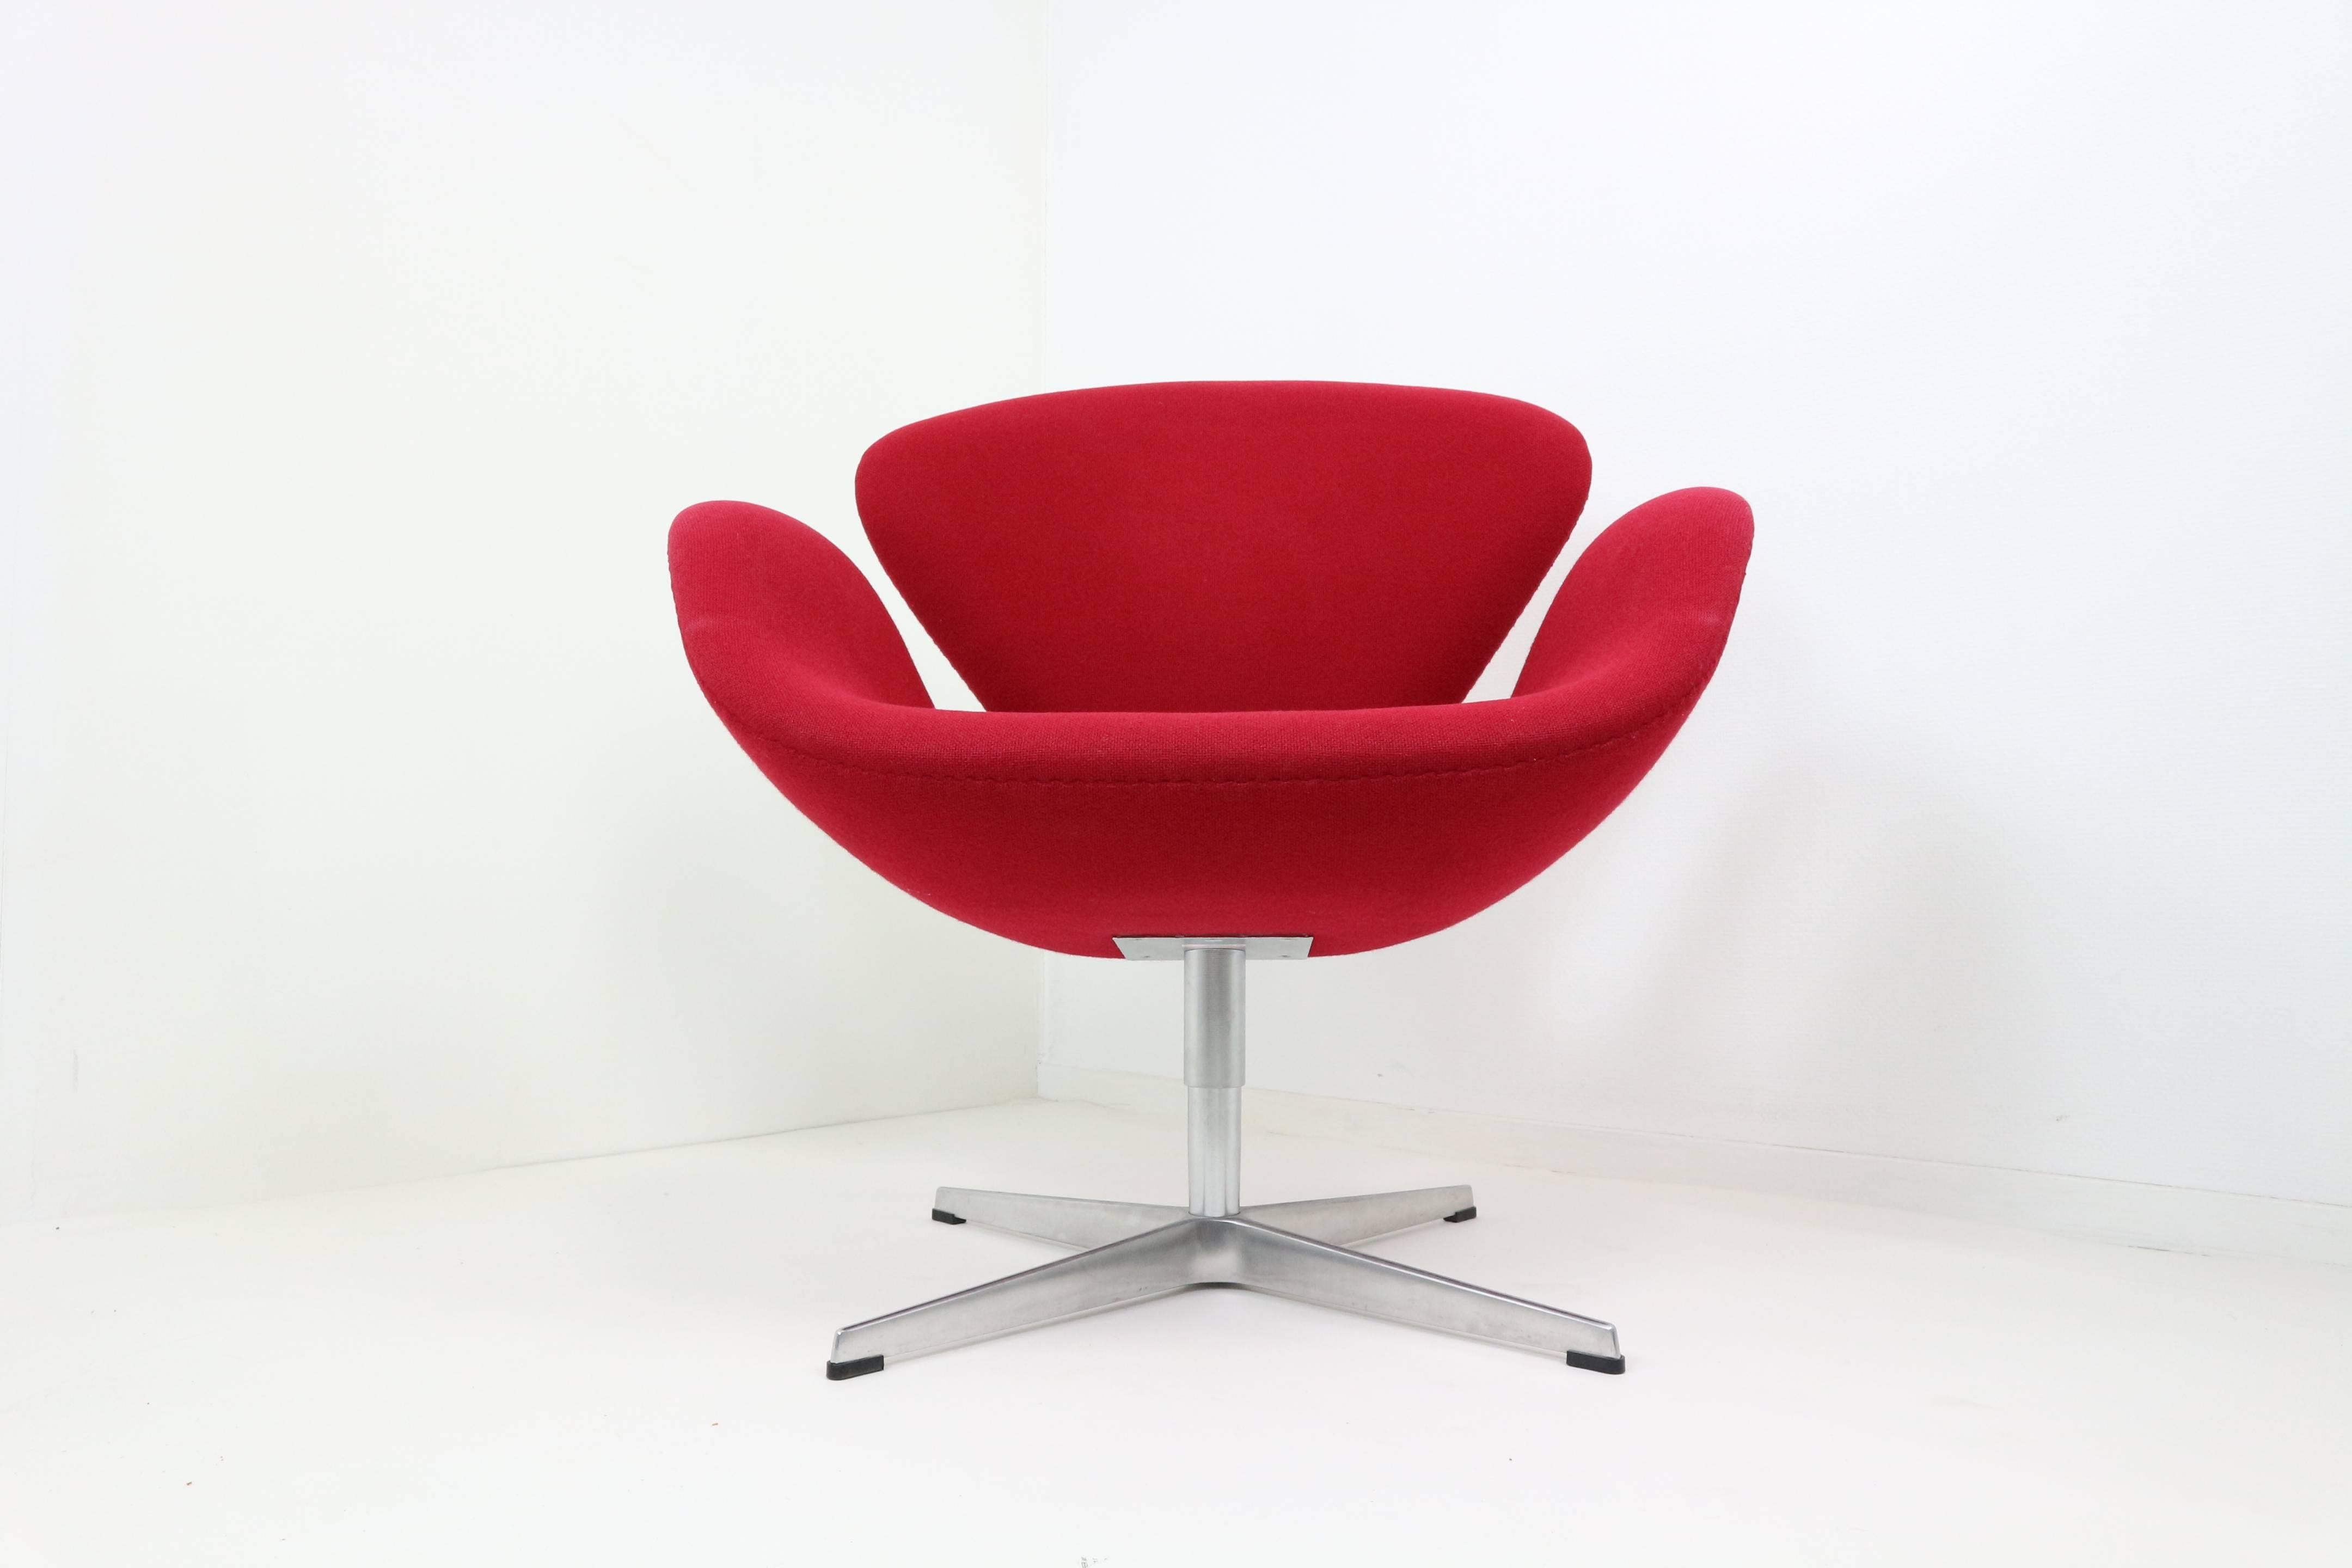 We have multiple Swan chairs in original red wine upholstery, designed by Arne Jacobsen in 1958 and manufactured by Fritz Hansen in 2006. Prices are per piece. Arne Jacobsen designed the Swan chair as well as the Egg chair for the lobby and lounge